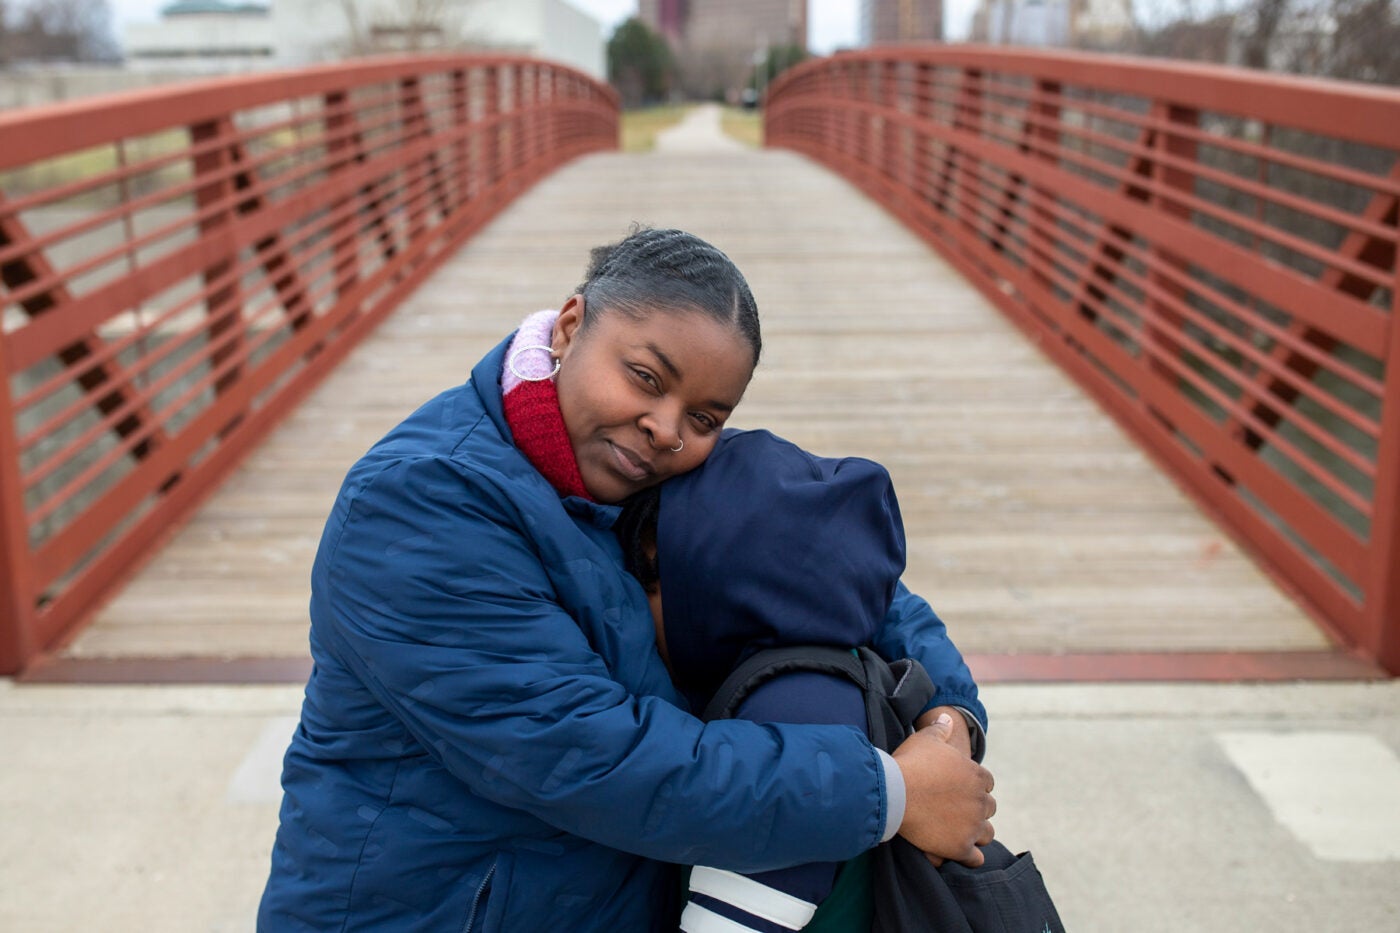 Shaketta Brooks embraces her son near a wooden bridge with red railings in Flint Michigan. She stares at the camera while her son hugs her chest.